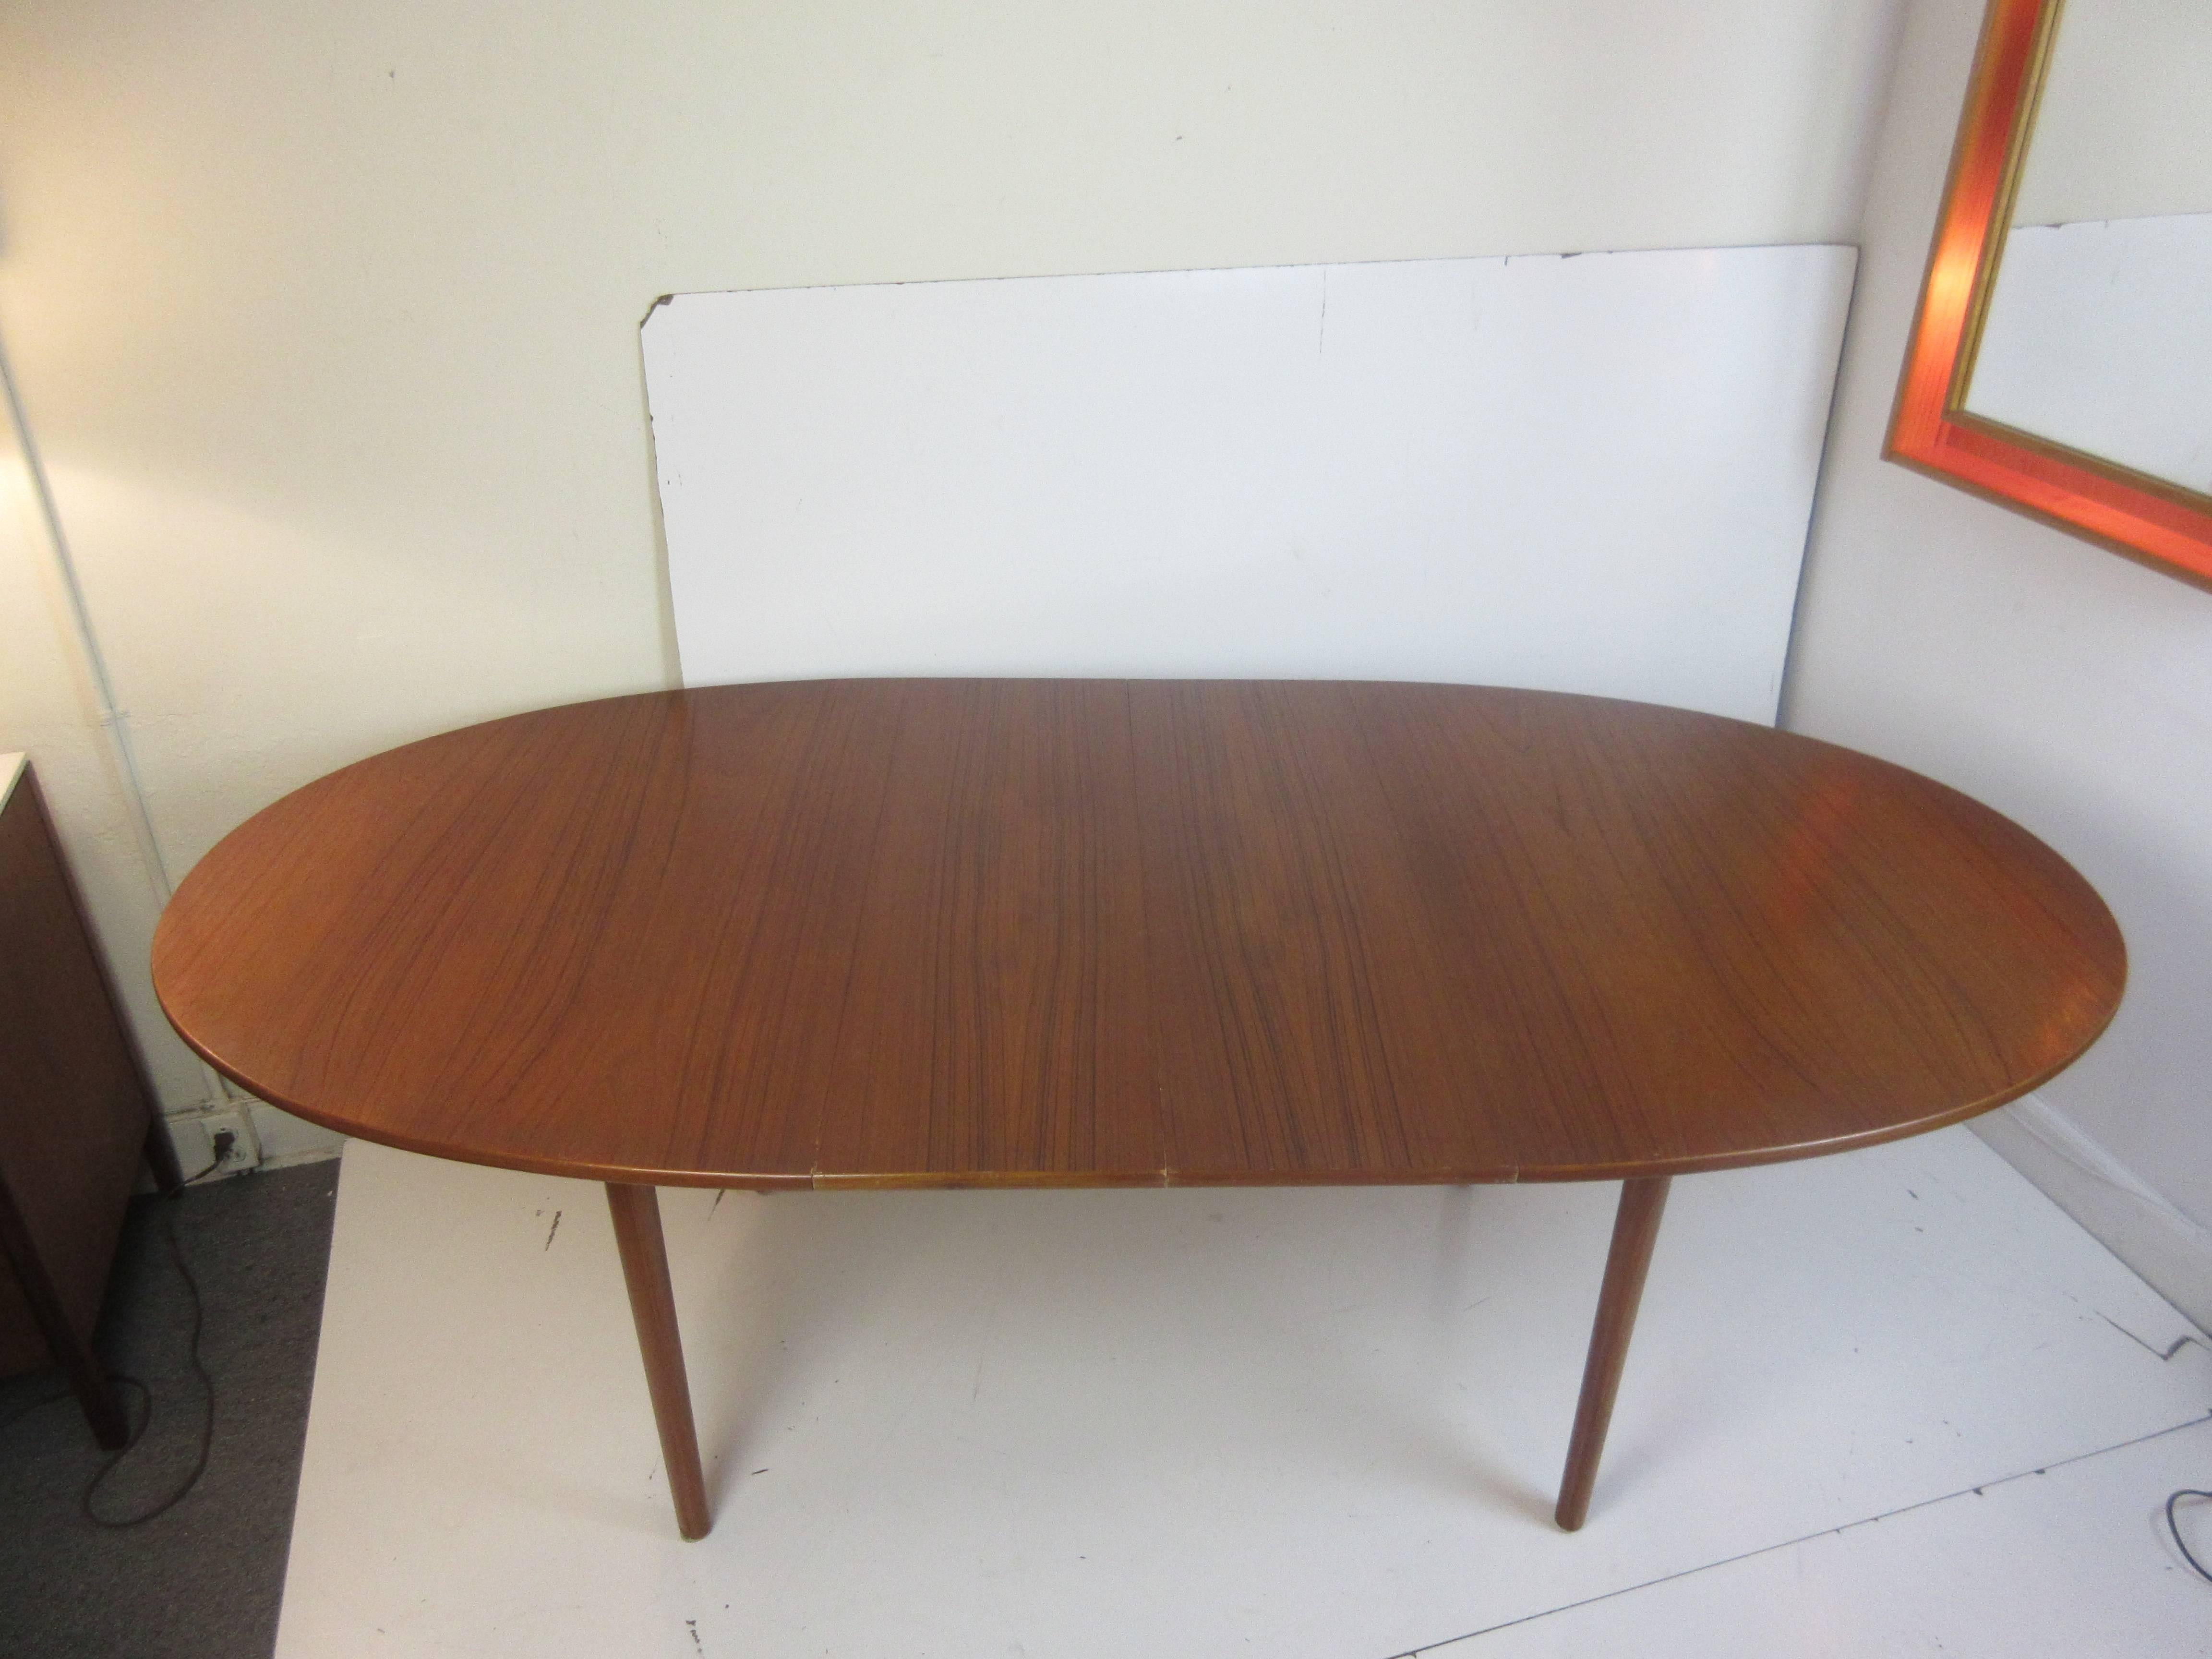 Peter Hvidt teak dining table by John Stuart with two leaves in an oval shape. Table has an inked mark on underside. Each leaf is 12 inches wide. When fully extended table measures 84